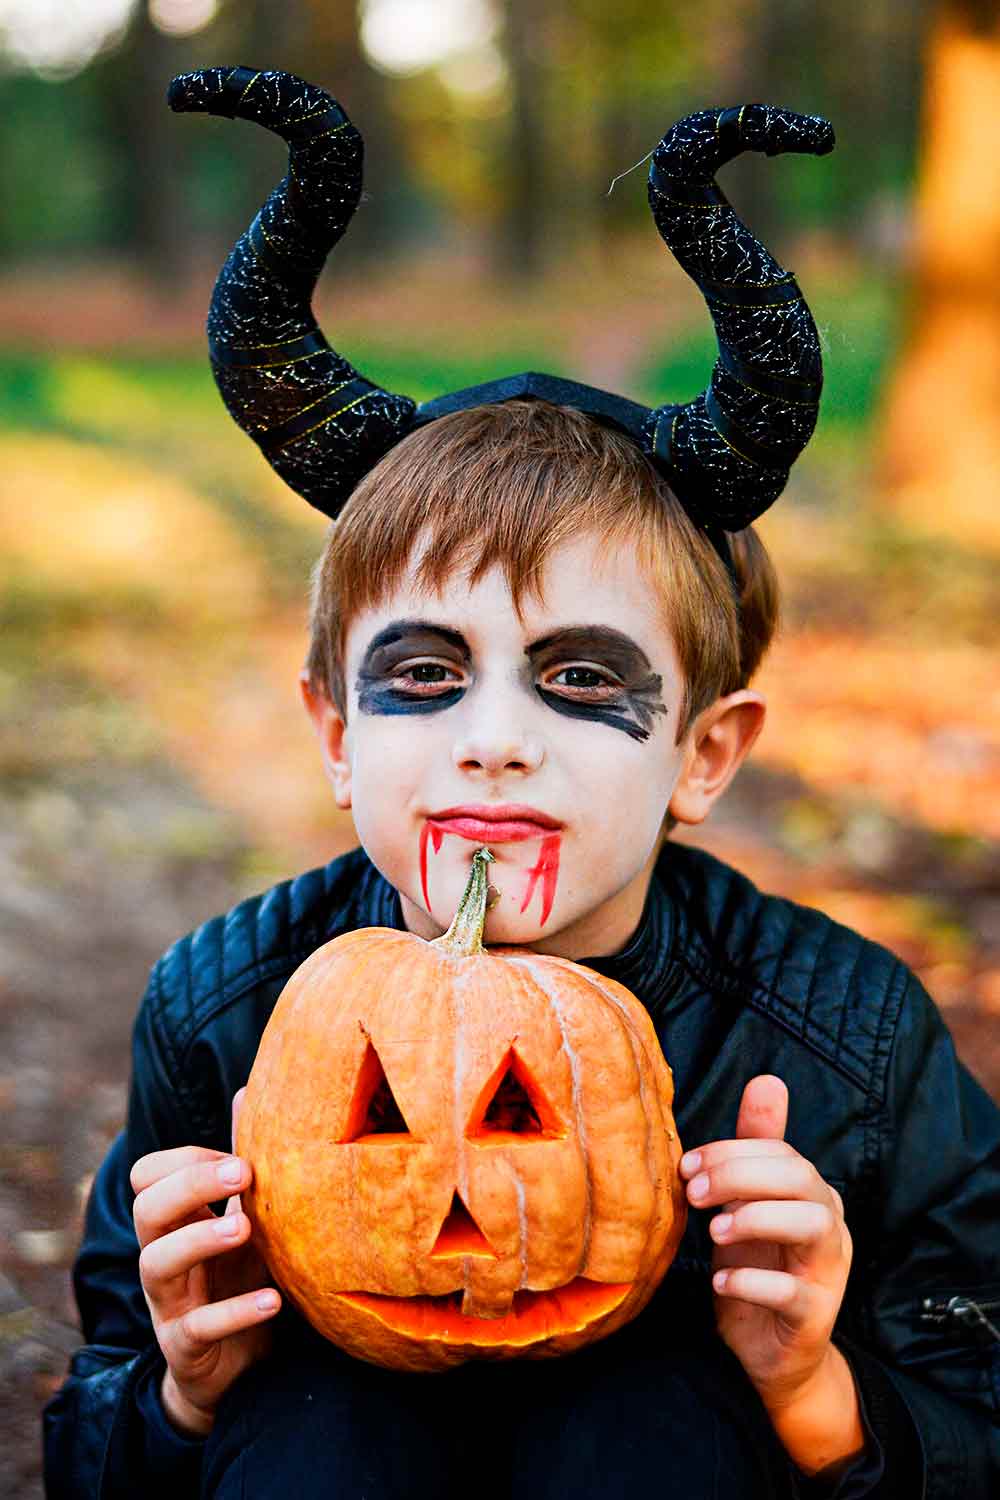 Devil Cool Costumes For Boy #boyshalloweencostumes #halloweencostumeforboy #boyscostumeforhalloween